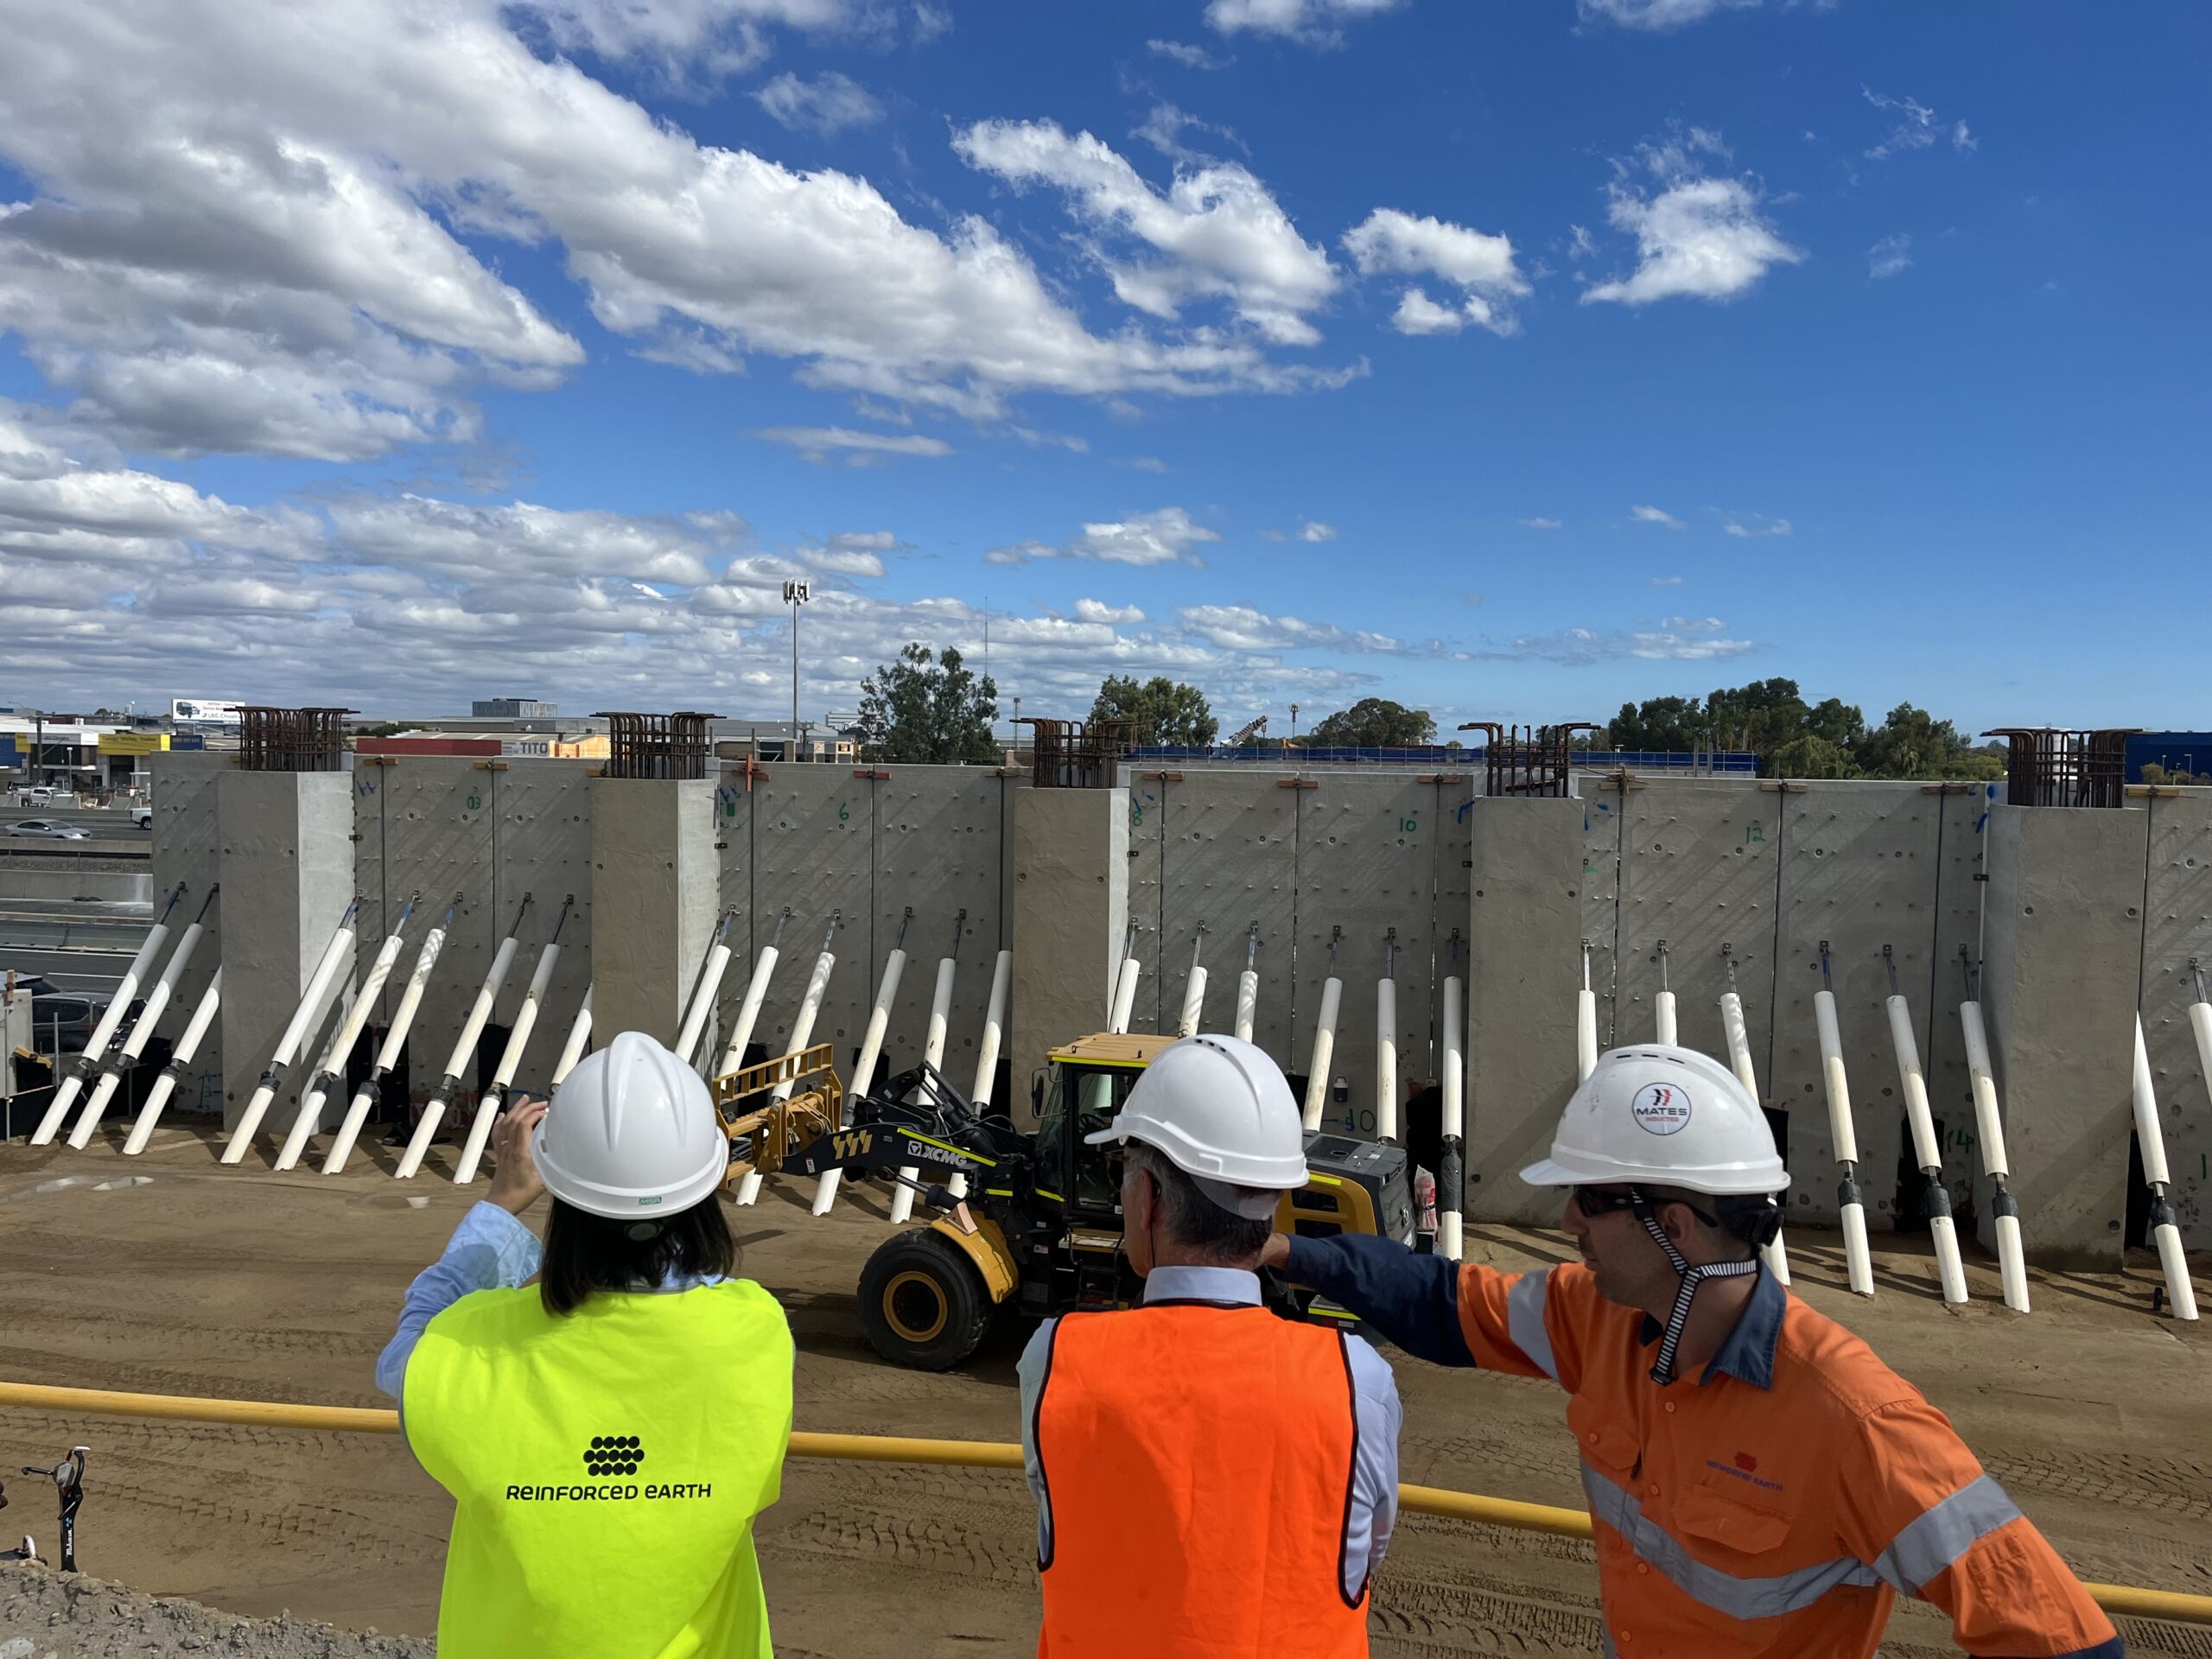 Engineers on site at the Phase 2 Stephenson Avenue Extension in Western Australia watching Reinforced earth walls being installed.